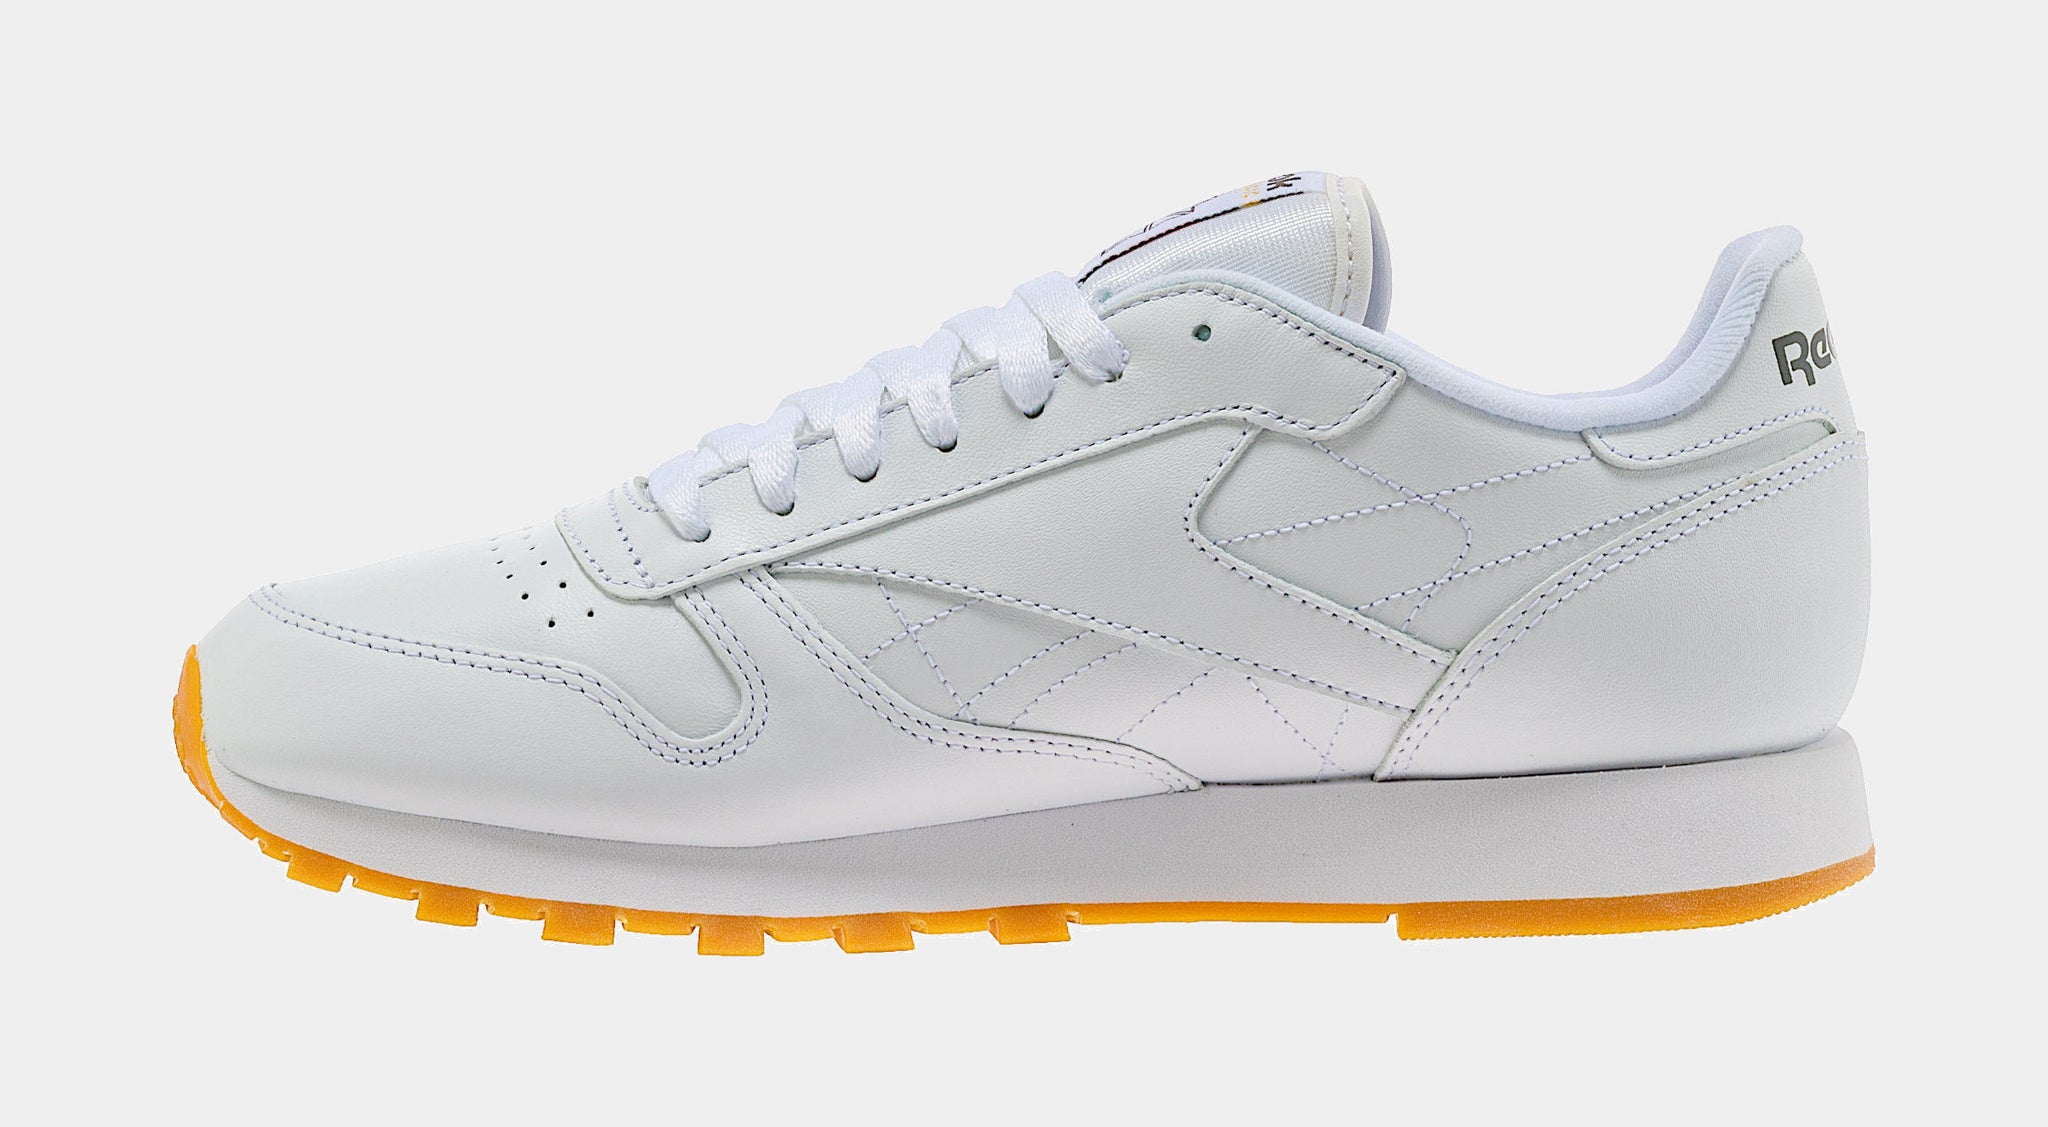 Reebok Classic Leather Mens Lifestyle Shoes White Gum 49797 – Palace